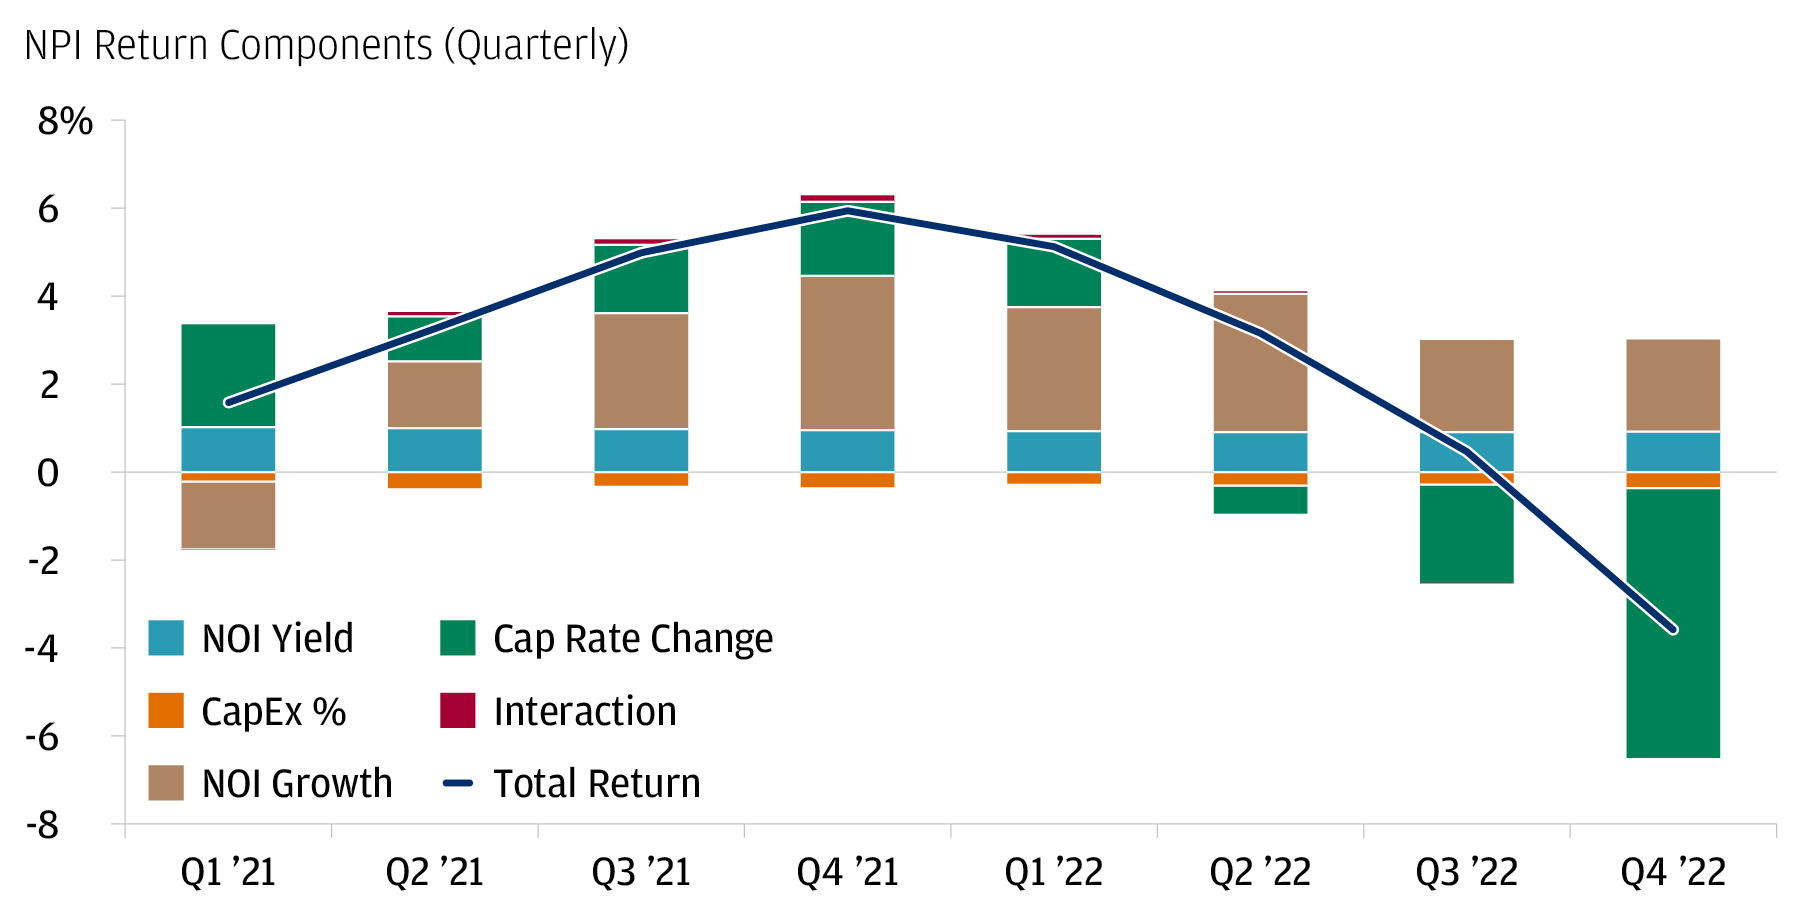 Recent CRE return patterns suggest that declines are due to higher cap rates 